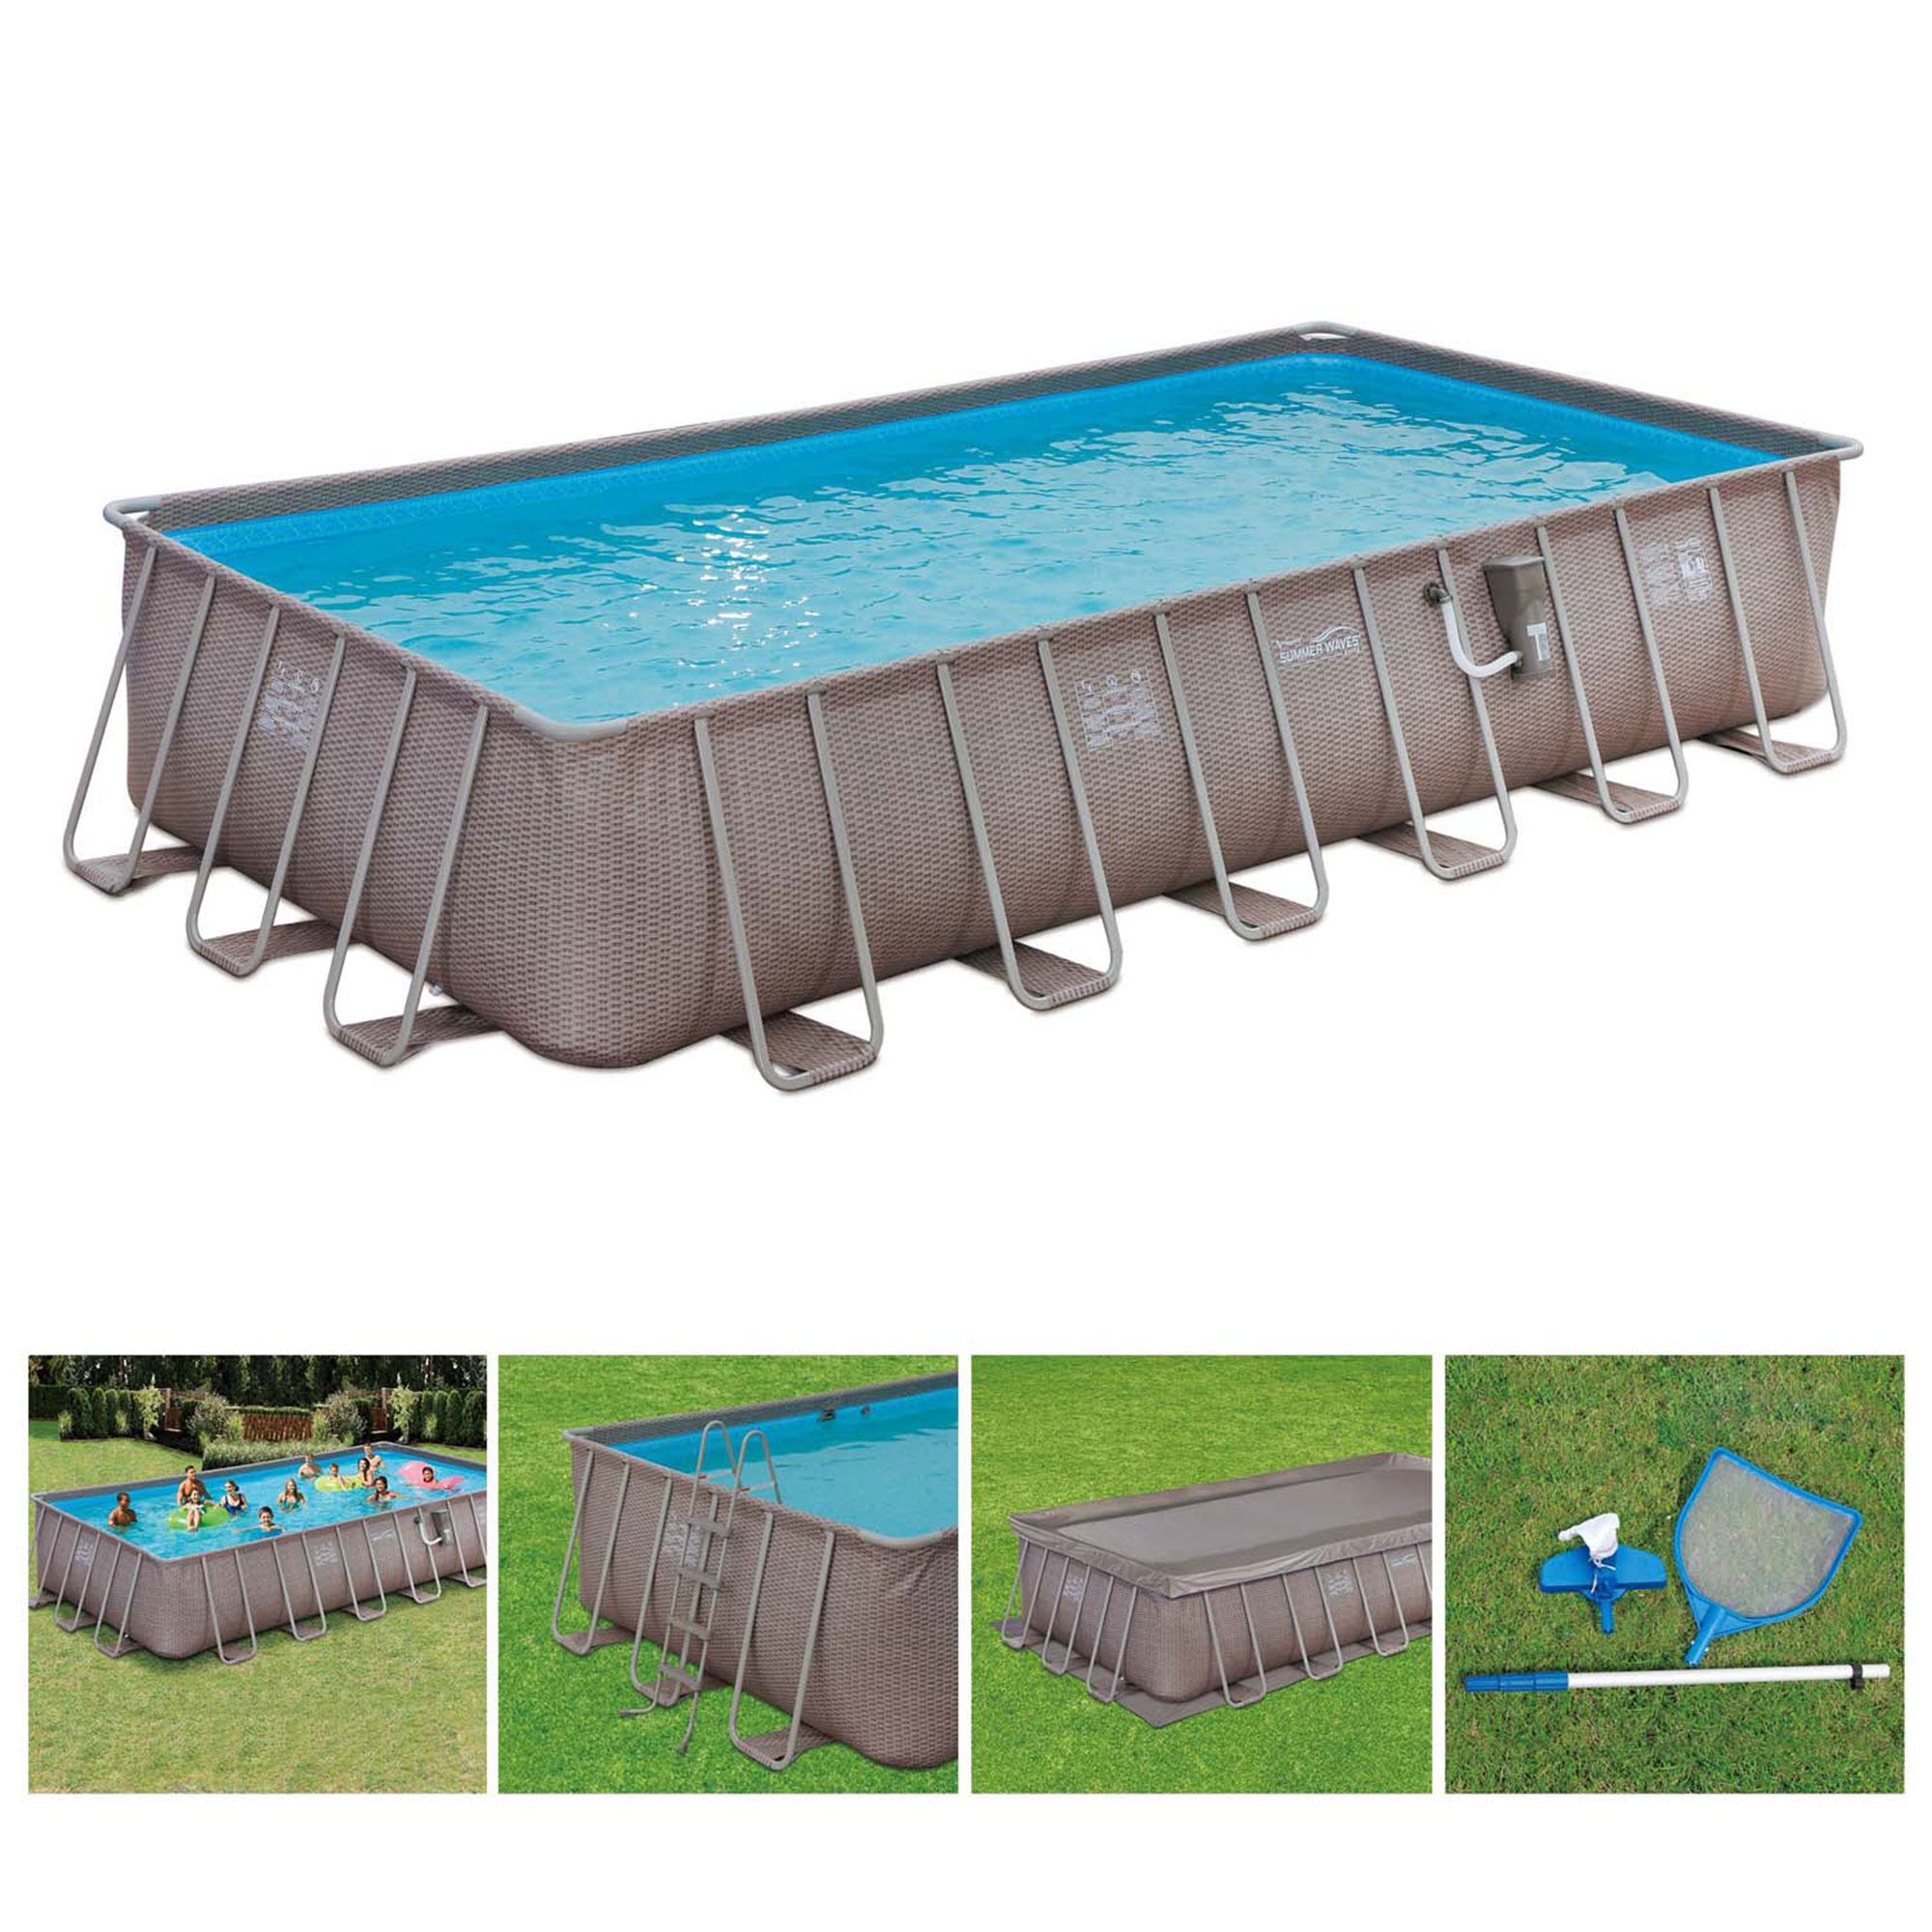 Summer Waves 24 x 12 x 4.5' Rectangle Above Ground Frame Swimming Pool Set - image 2 of 7